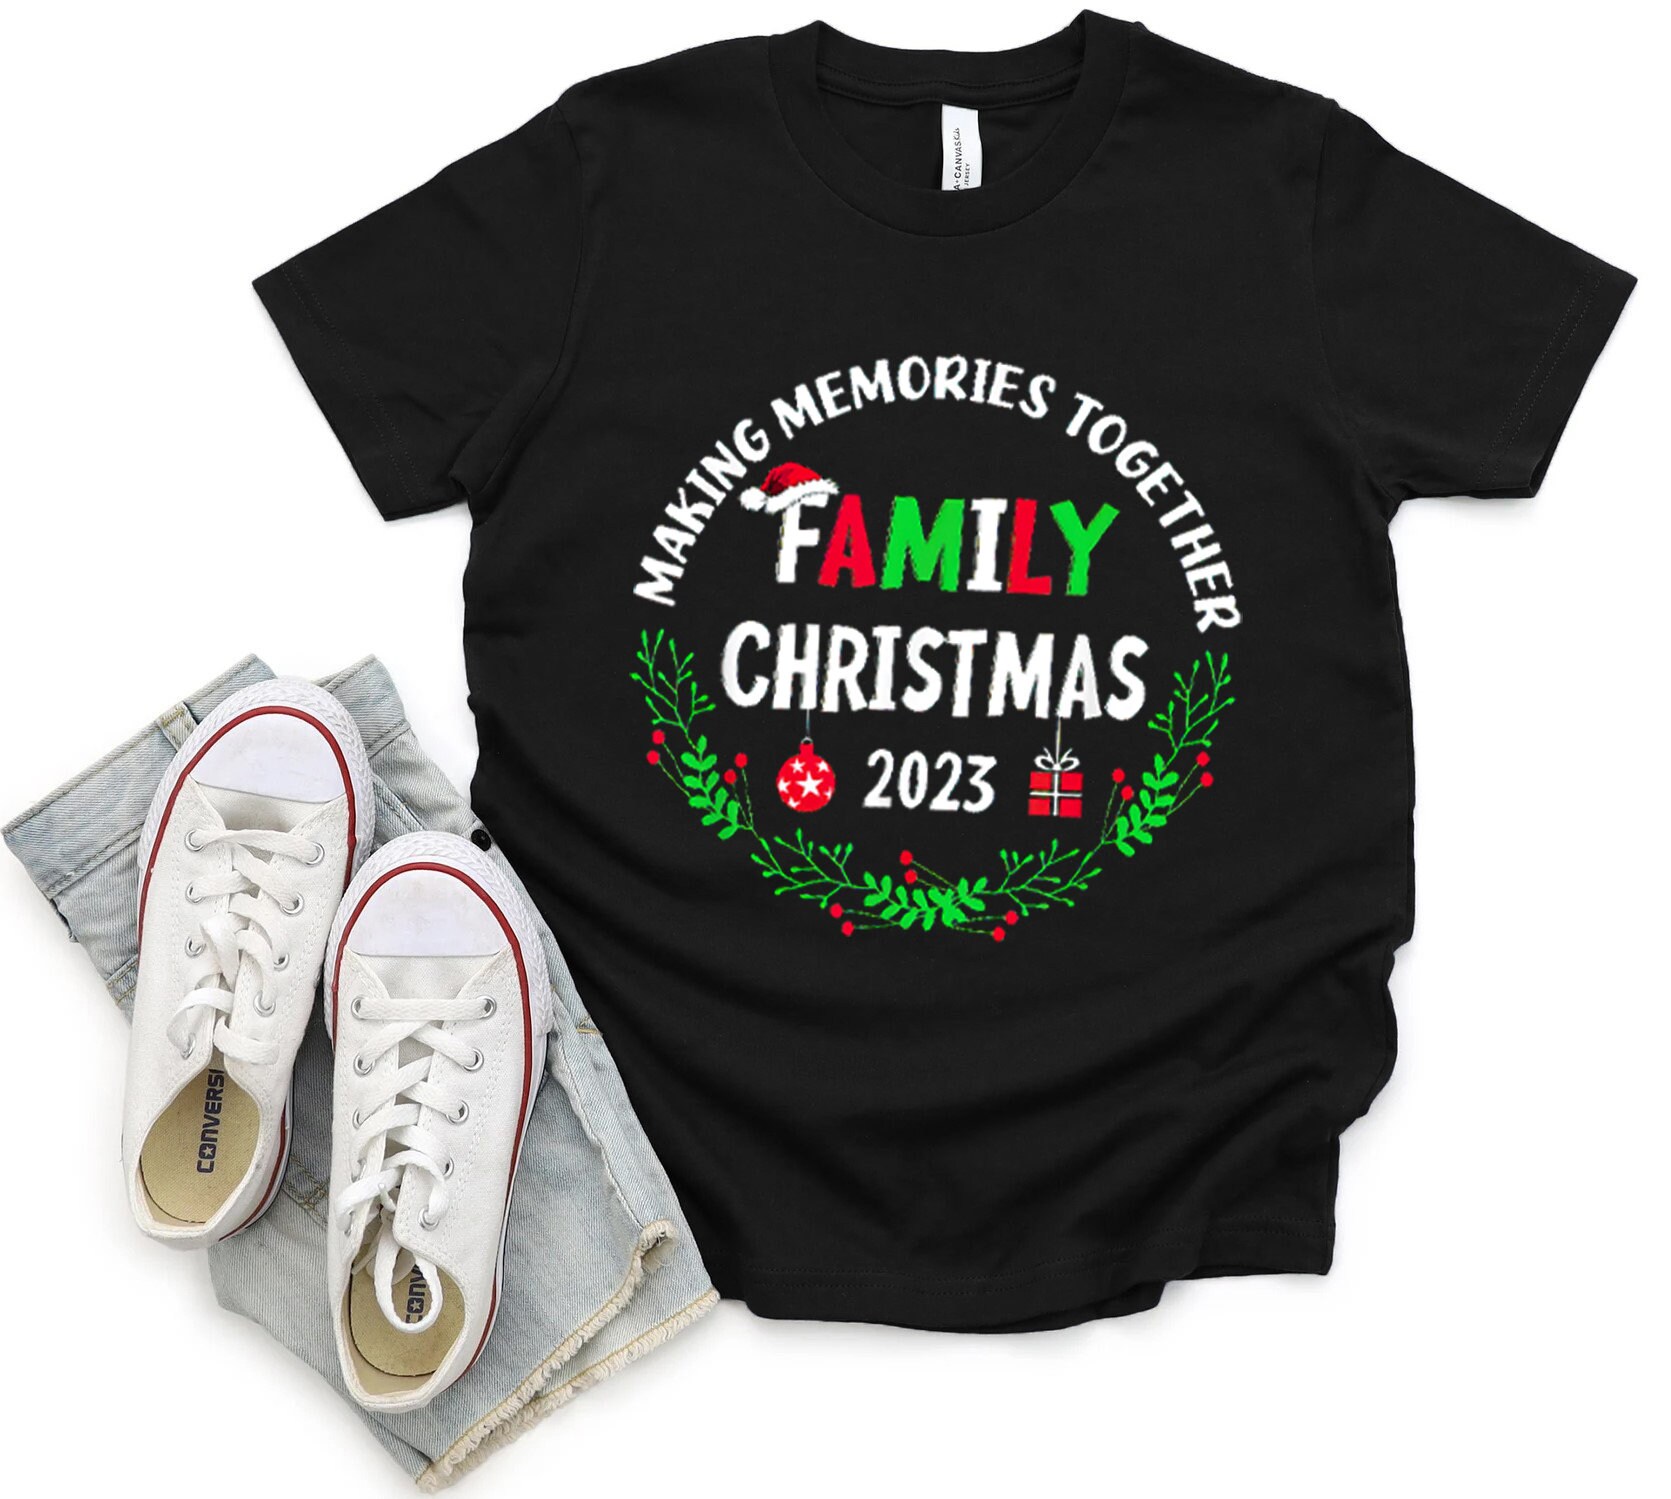 Matching Family Christmas Shirt 2023 Making Memories Together - Etsy